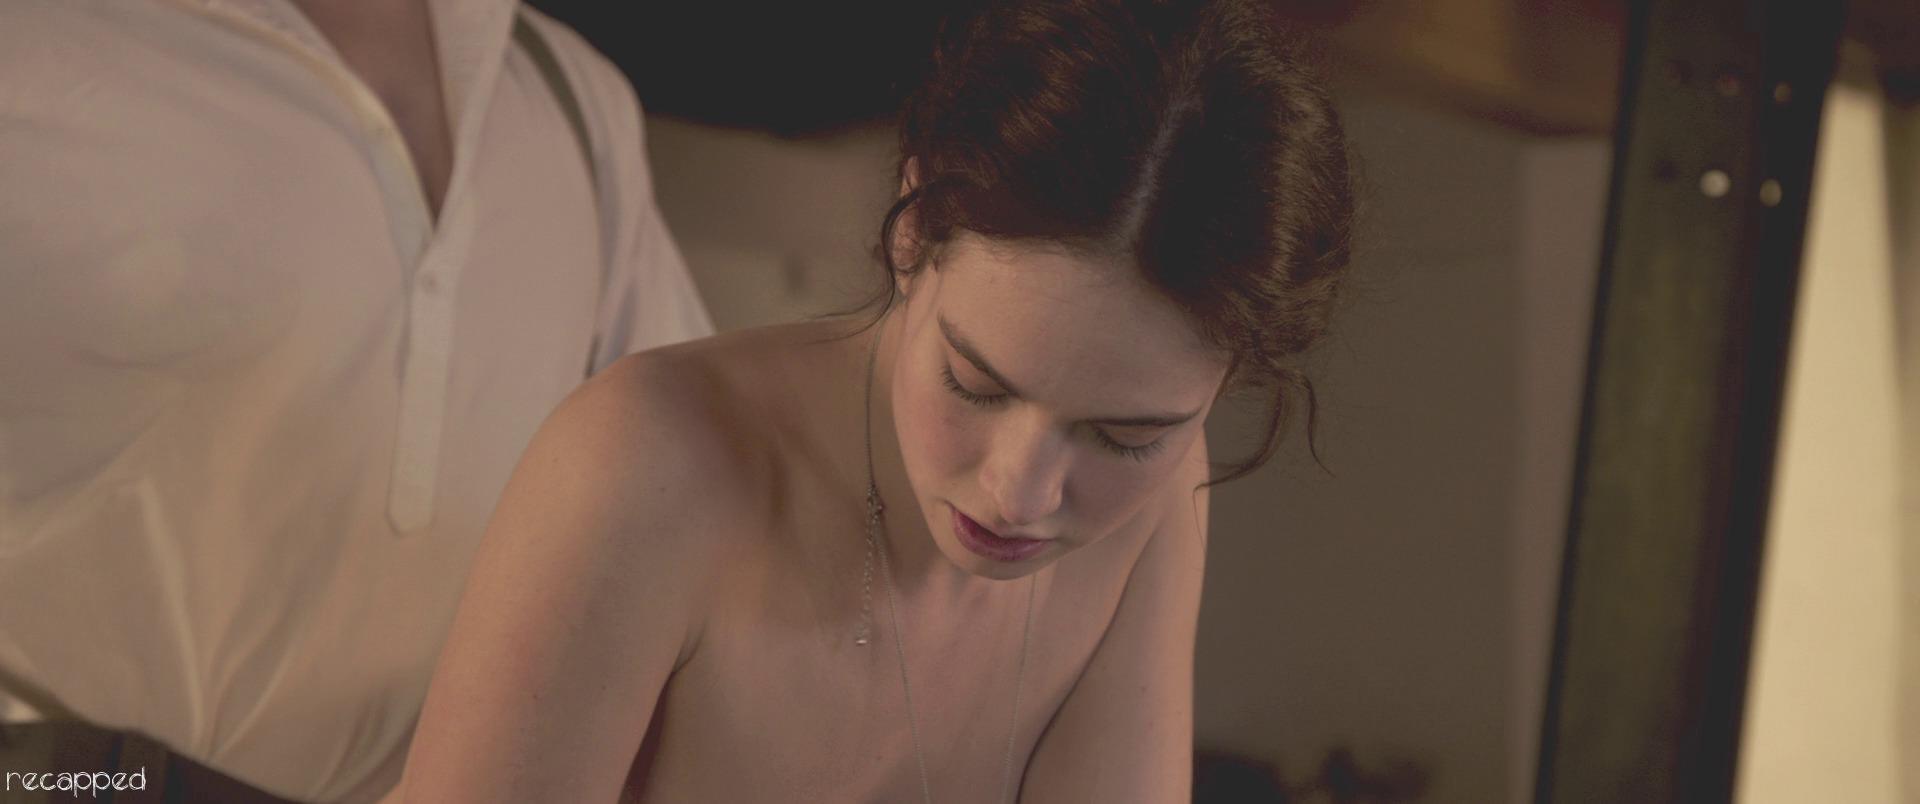 James nudes lily Lily James